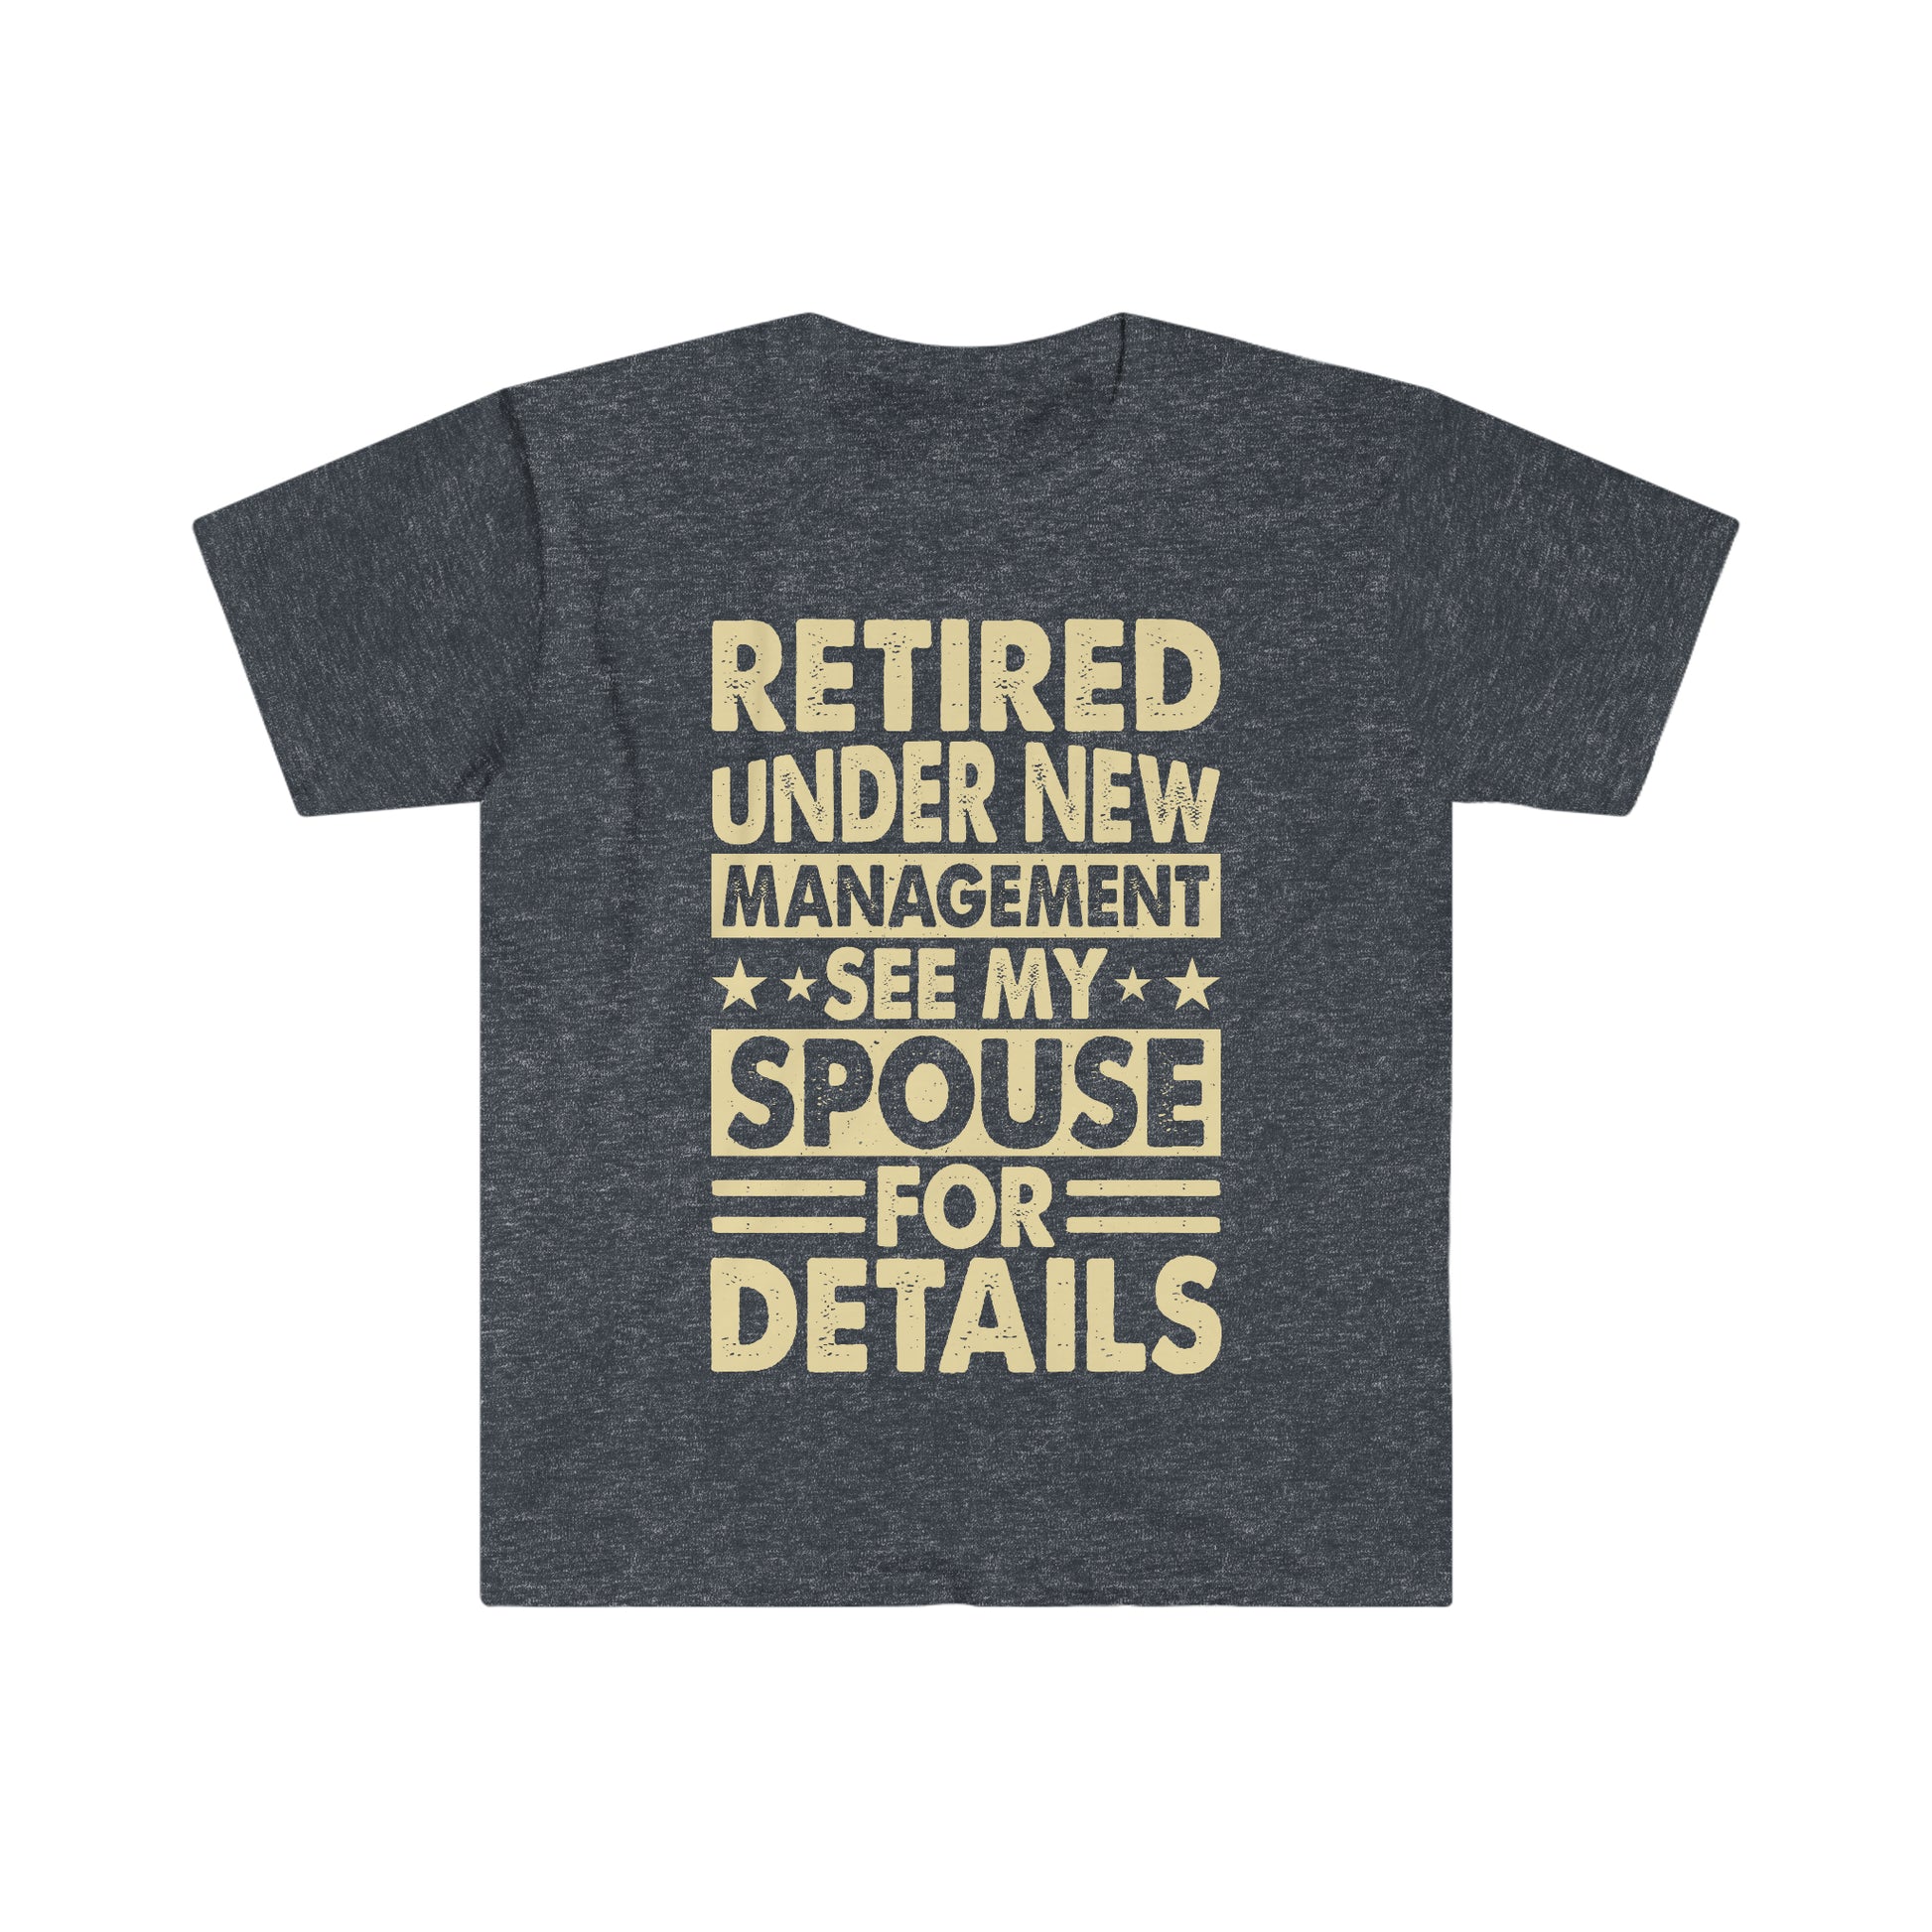 Under New Management See My Spouse For Details, Funny Retirement Shirt